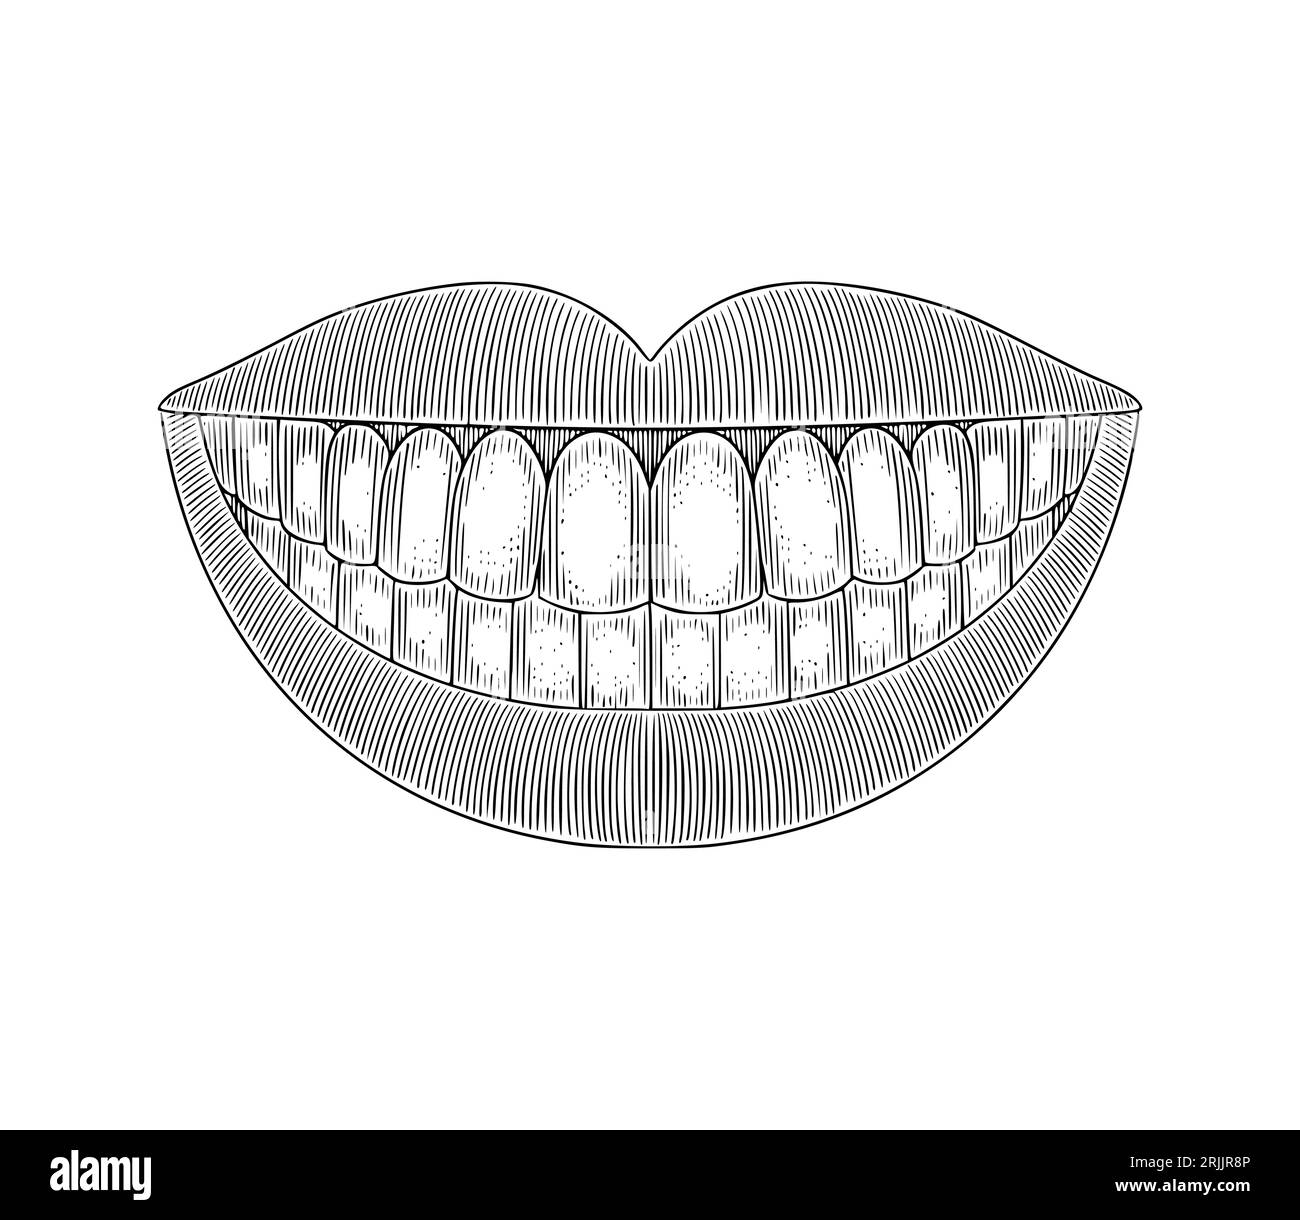 smiling mouth showing teeth. vintage engraving drawing style vector illustration Stock Vector